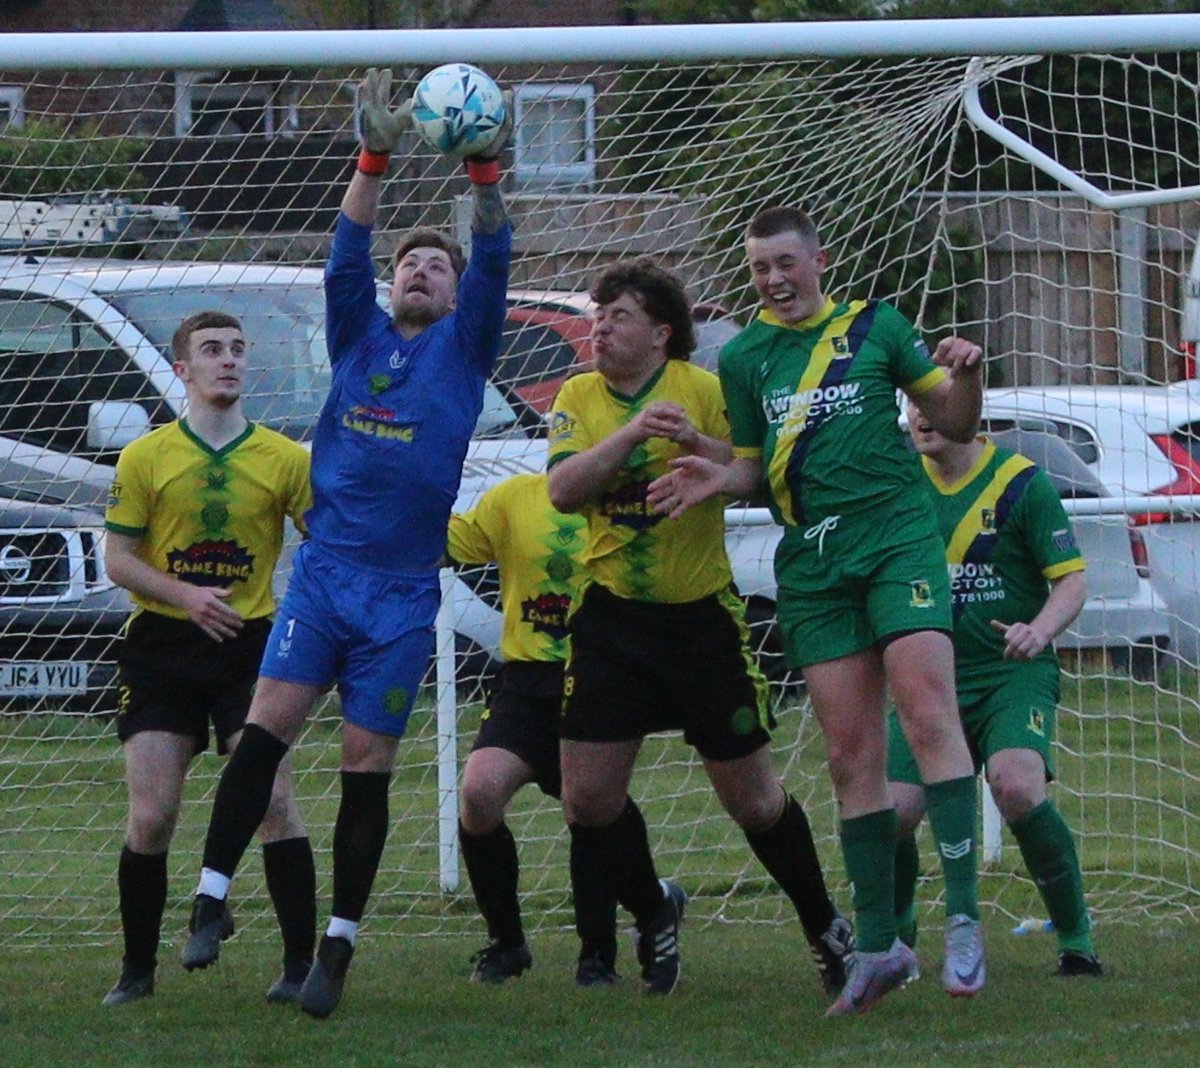 THIRD TEAM | CAUGHT ON 📸 @BurtonGraham9's pictures from last night's local derby against @WithernseaAfc at the #FarmOfDreams in @RightCarUK @ERCountyLeague Division 4 are now up on our club Facebook page... #euafc | #Since1947 | #PrideOfHolderness 🟢🟡